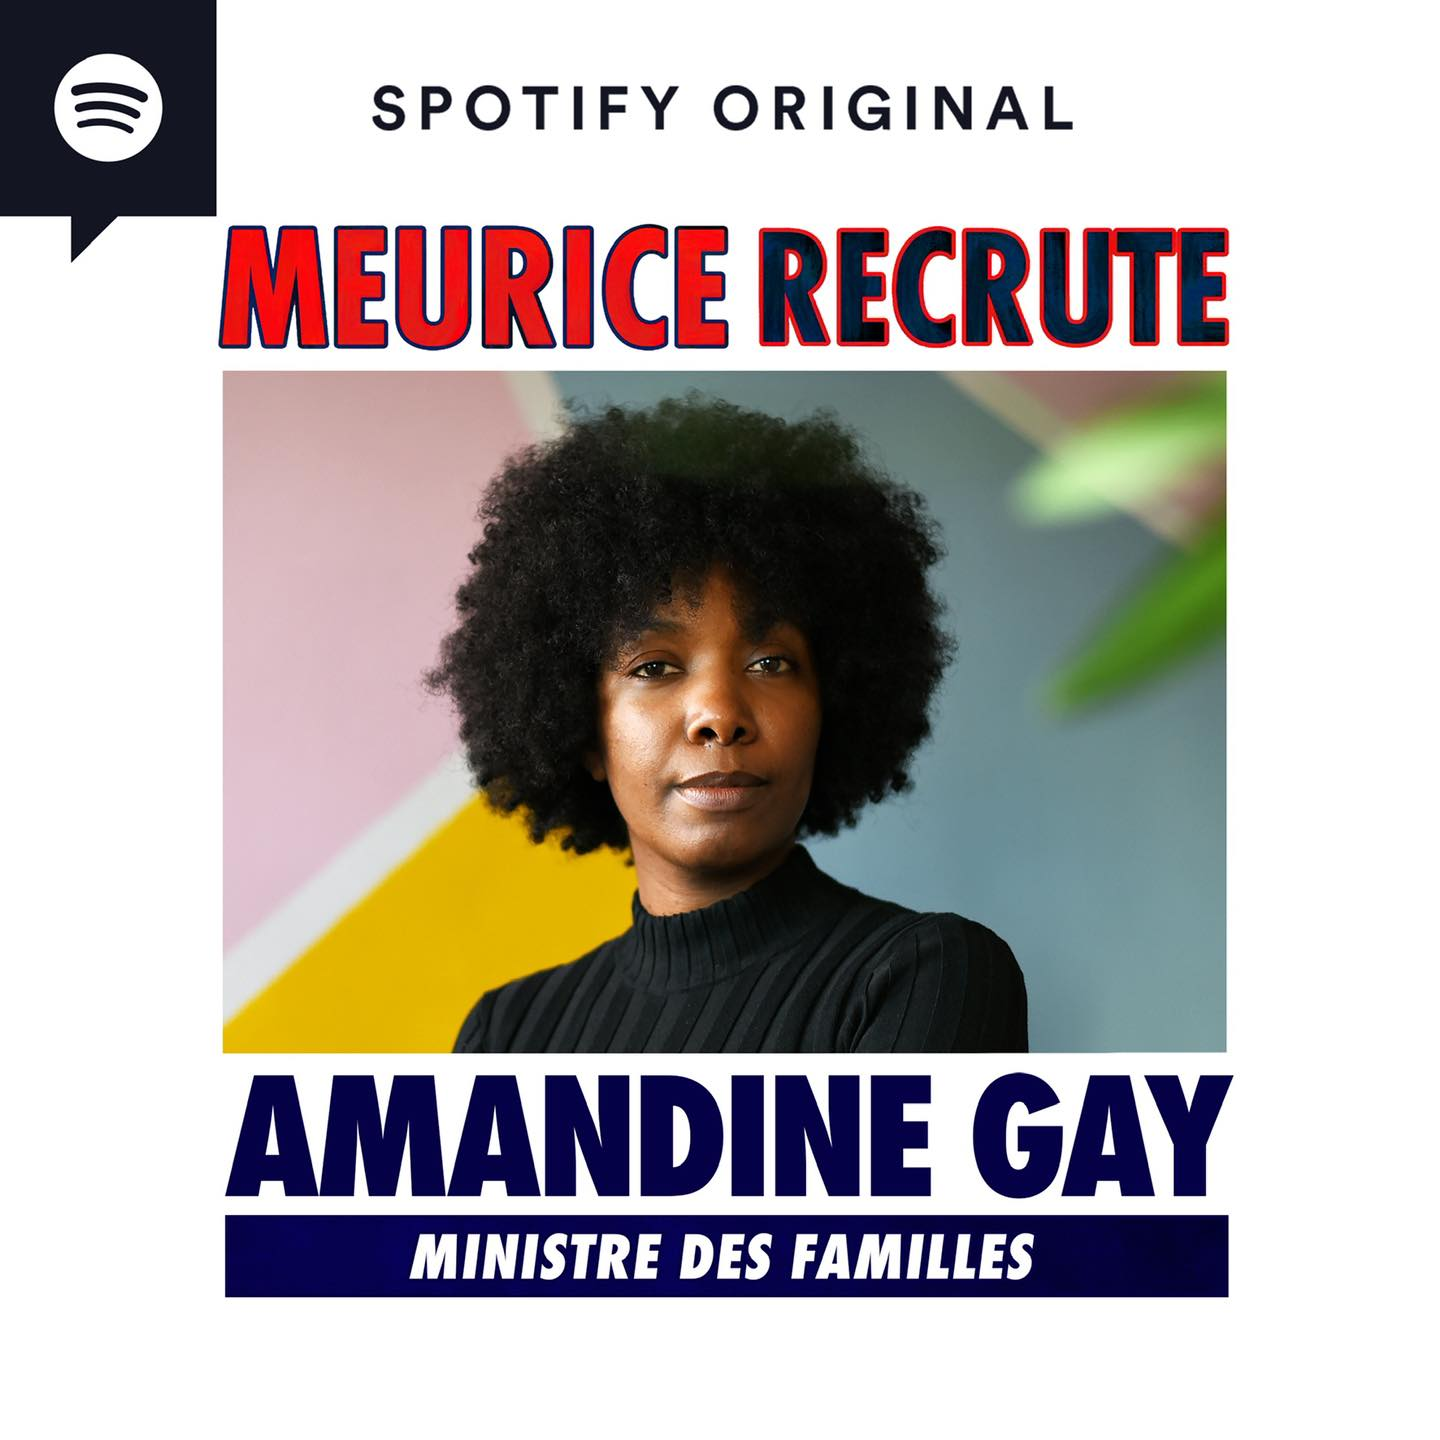 « Amandine Gay, families minister » #meuricerecrute